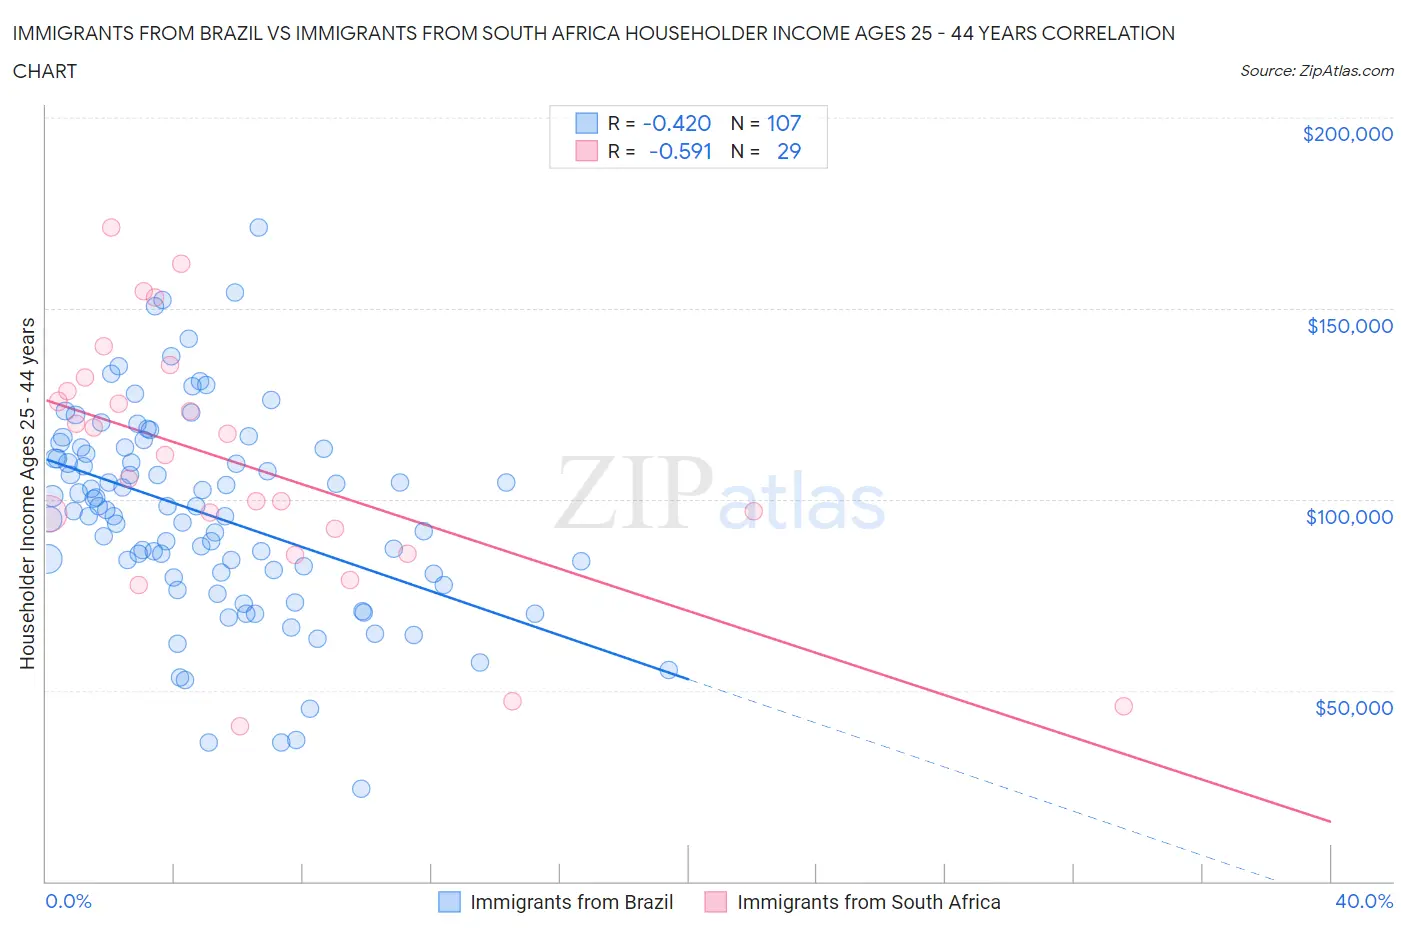 Immigrants from Brazil vs Immigrants from South Africa Householder Income Ages 25 - 44 years